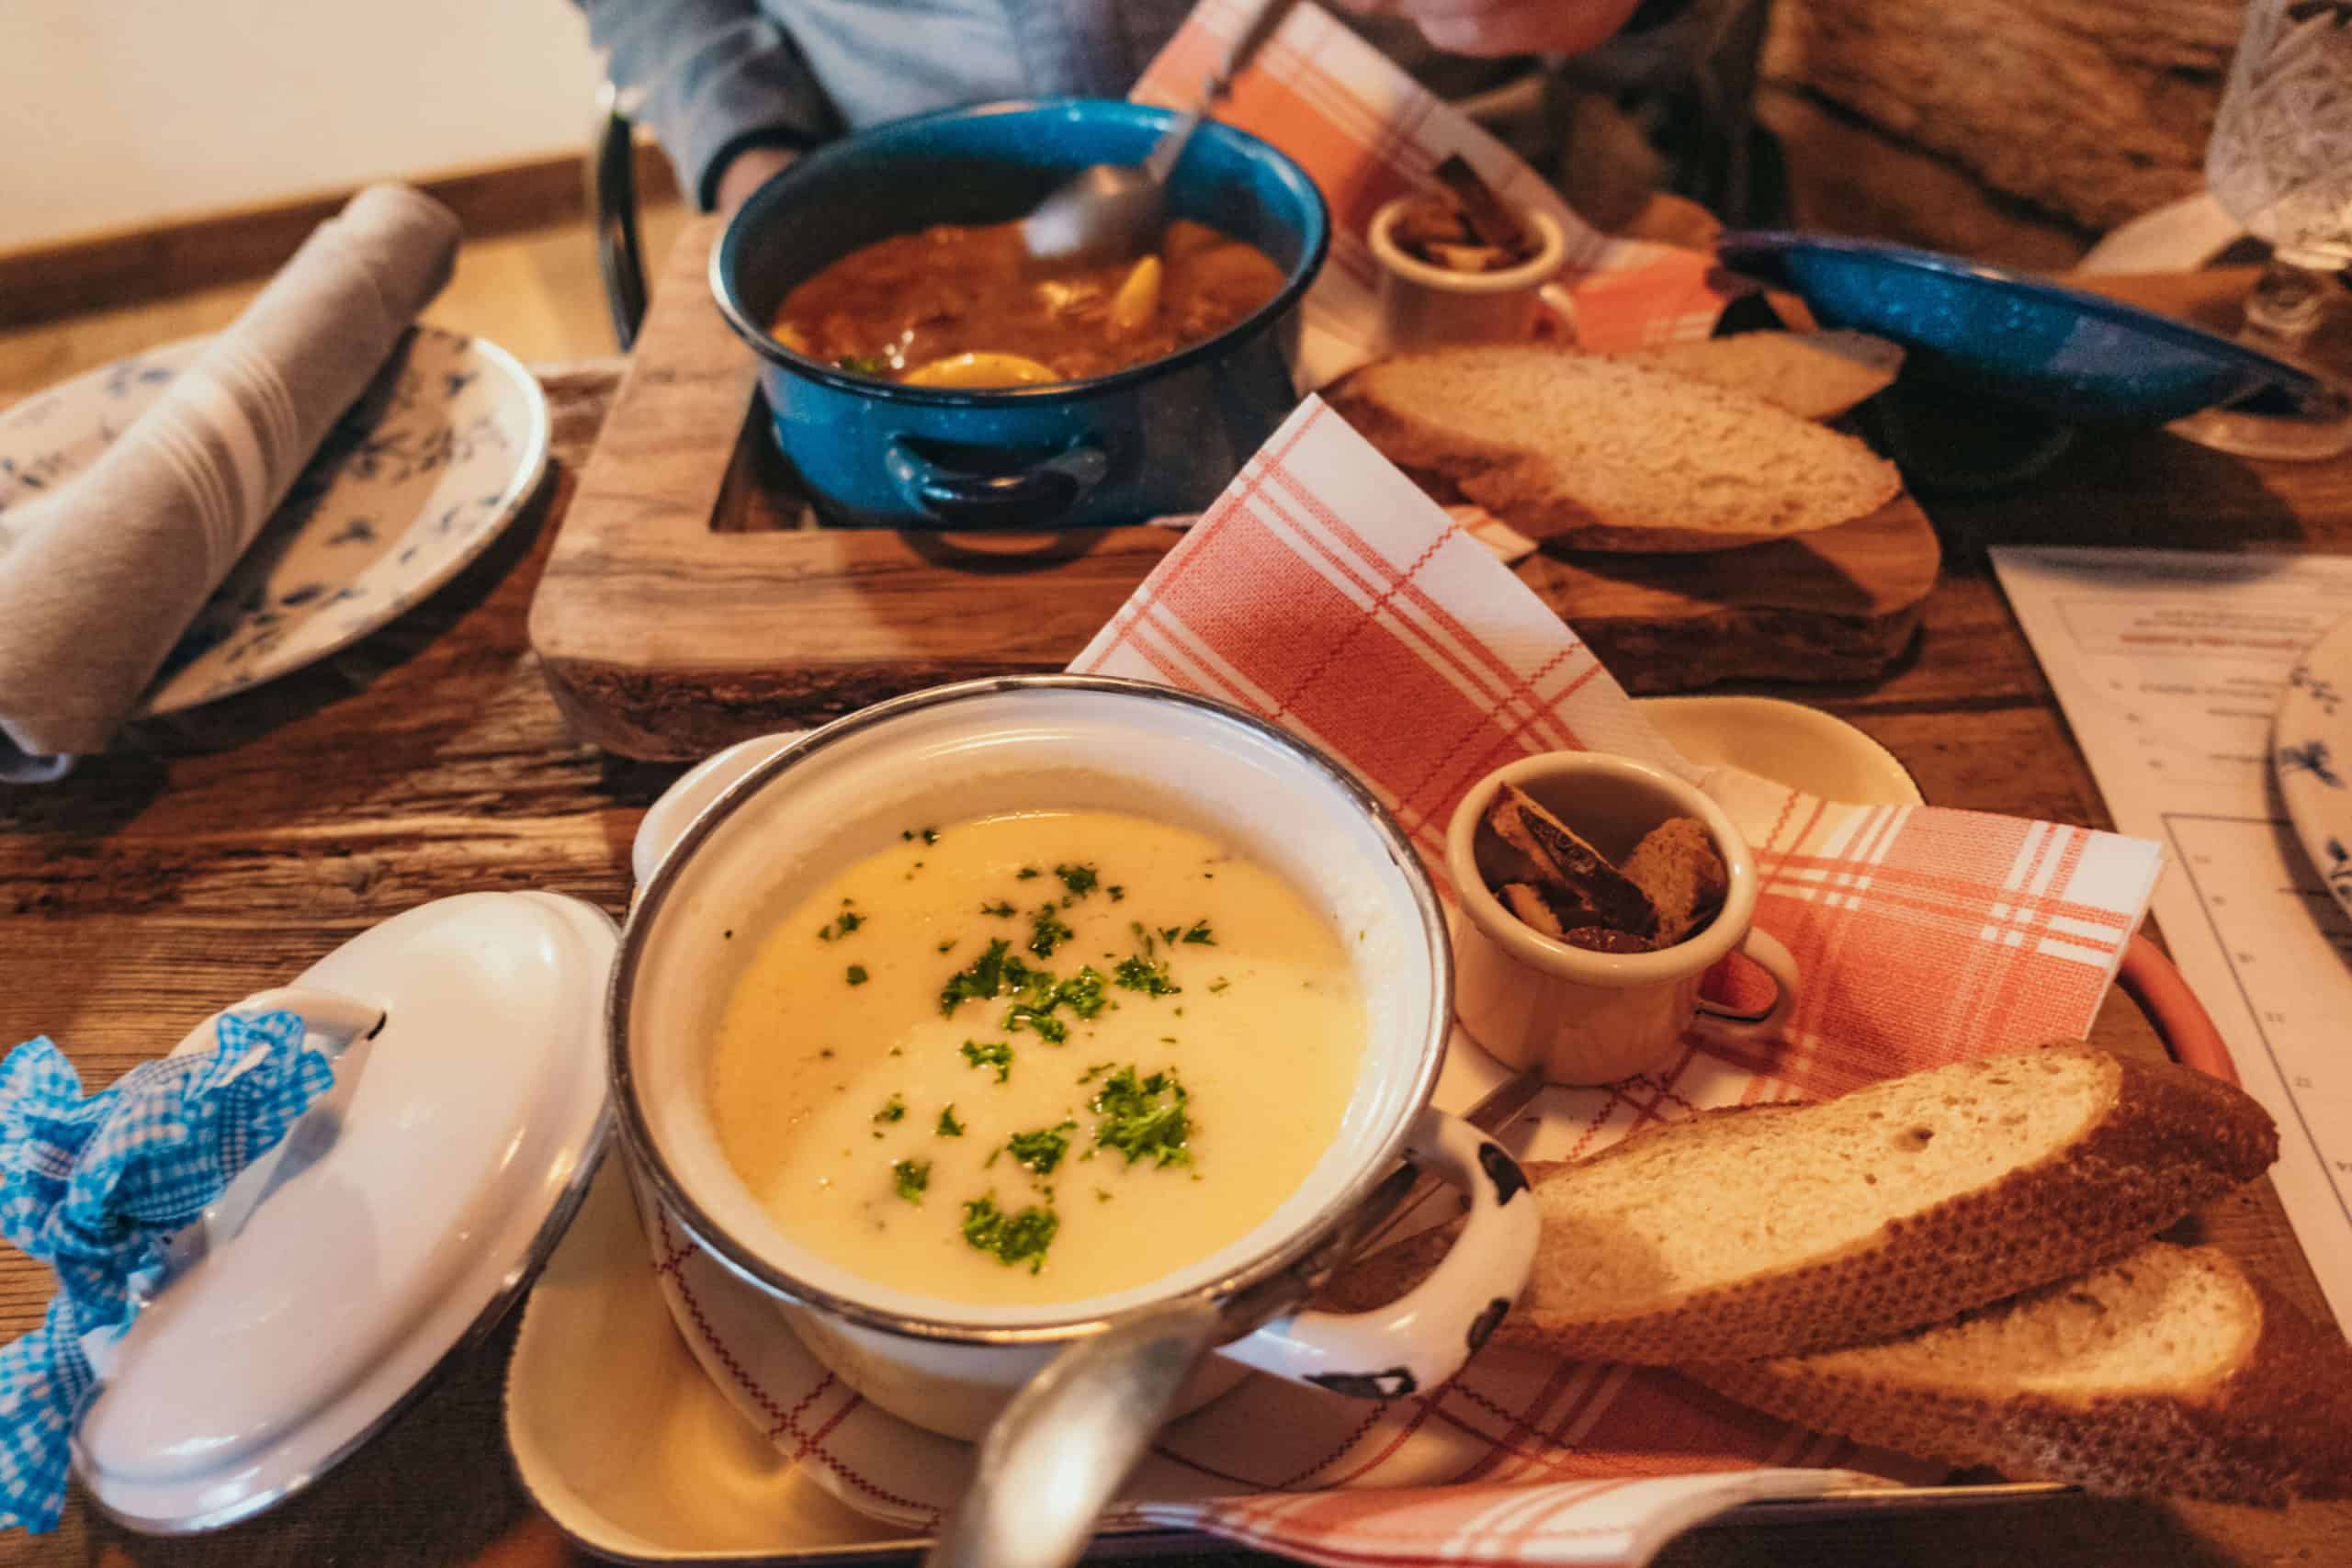 Swiss Mountain Cheese Soup at Alpenrose | The Ultimate Guide to Vail, Colorado